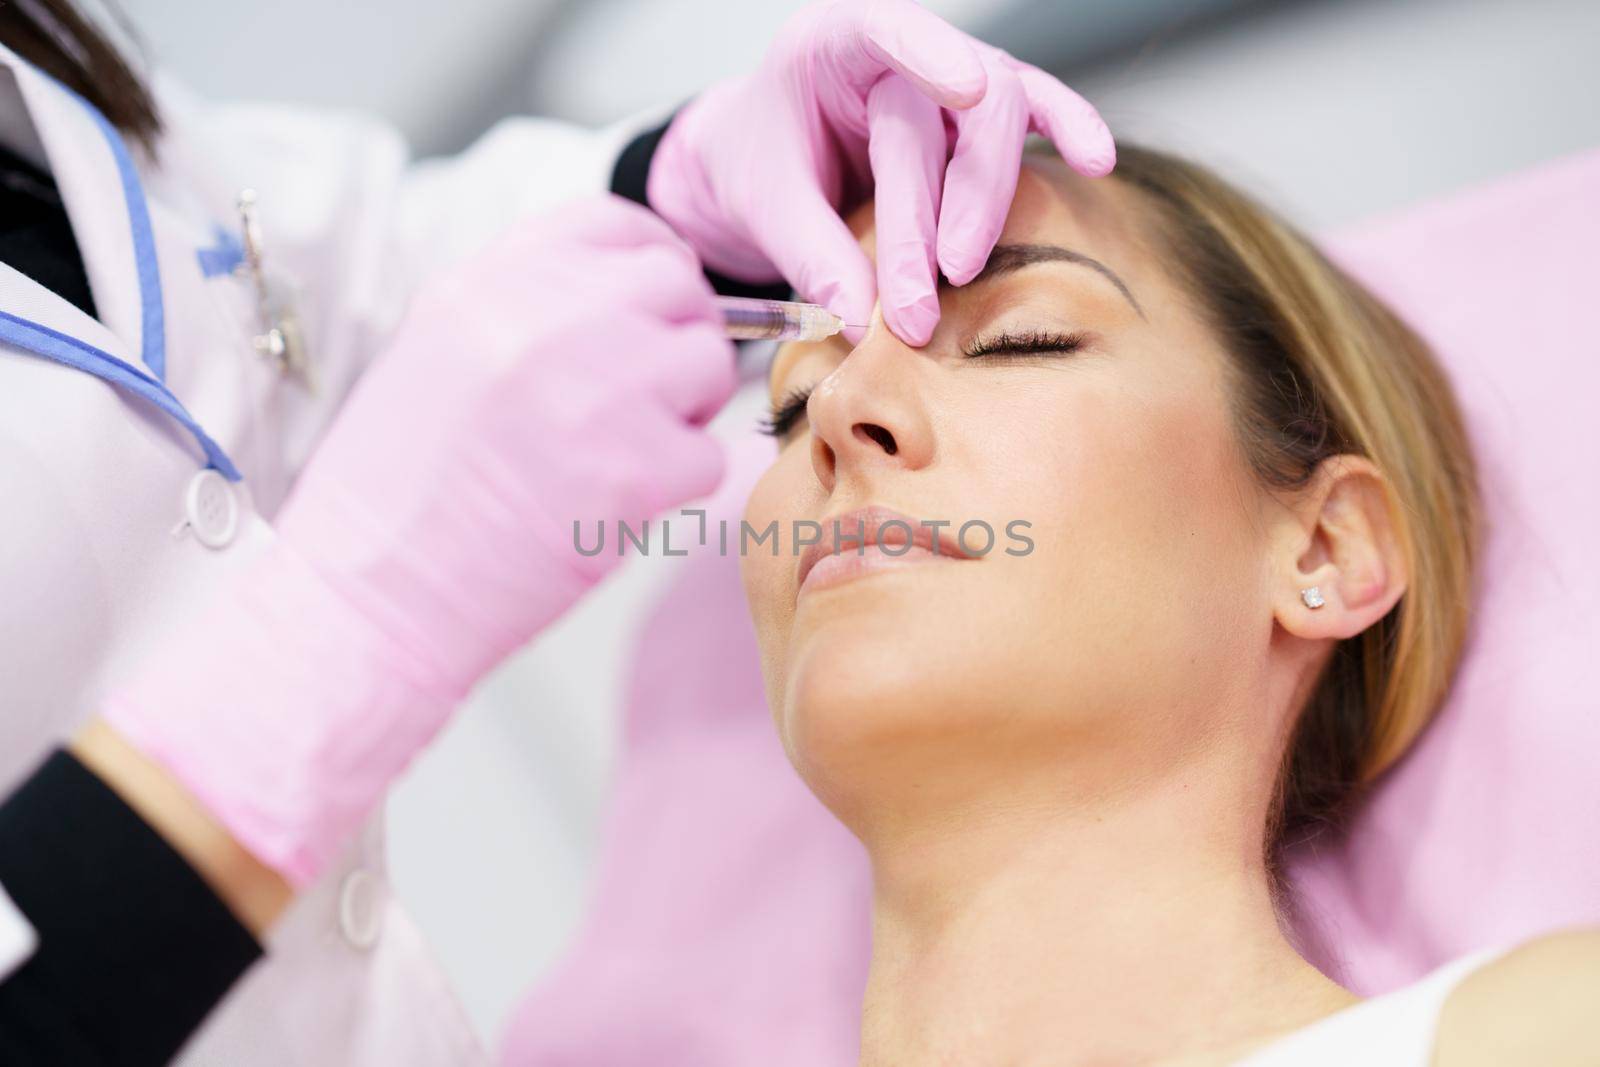 Doctor performing rhinoplasty by injection of hyaluronic acid in the nose of his patient, a middle-aged woman.